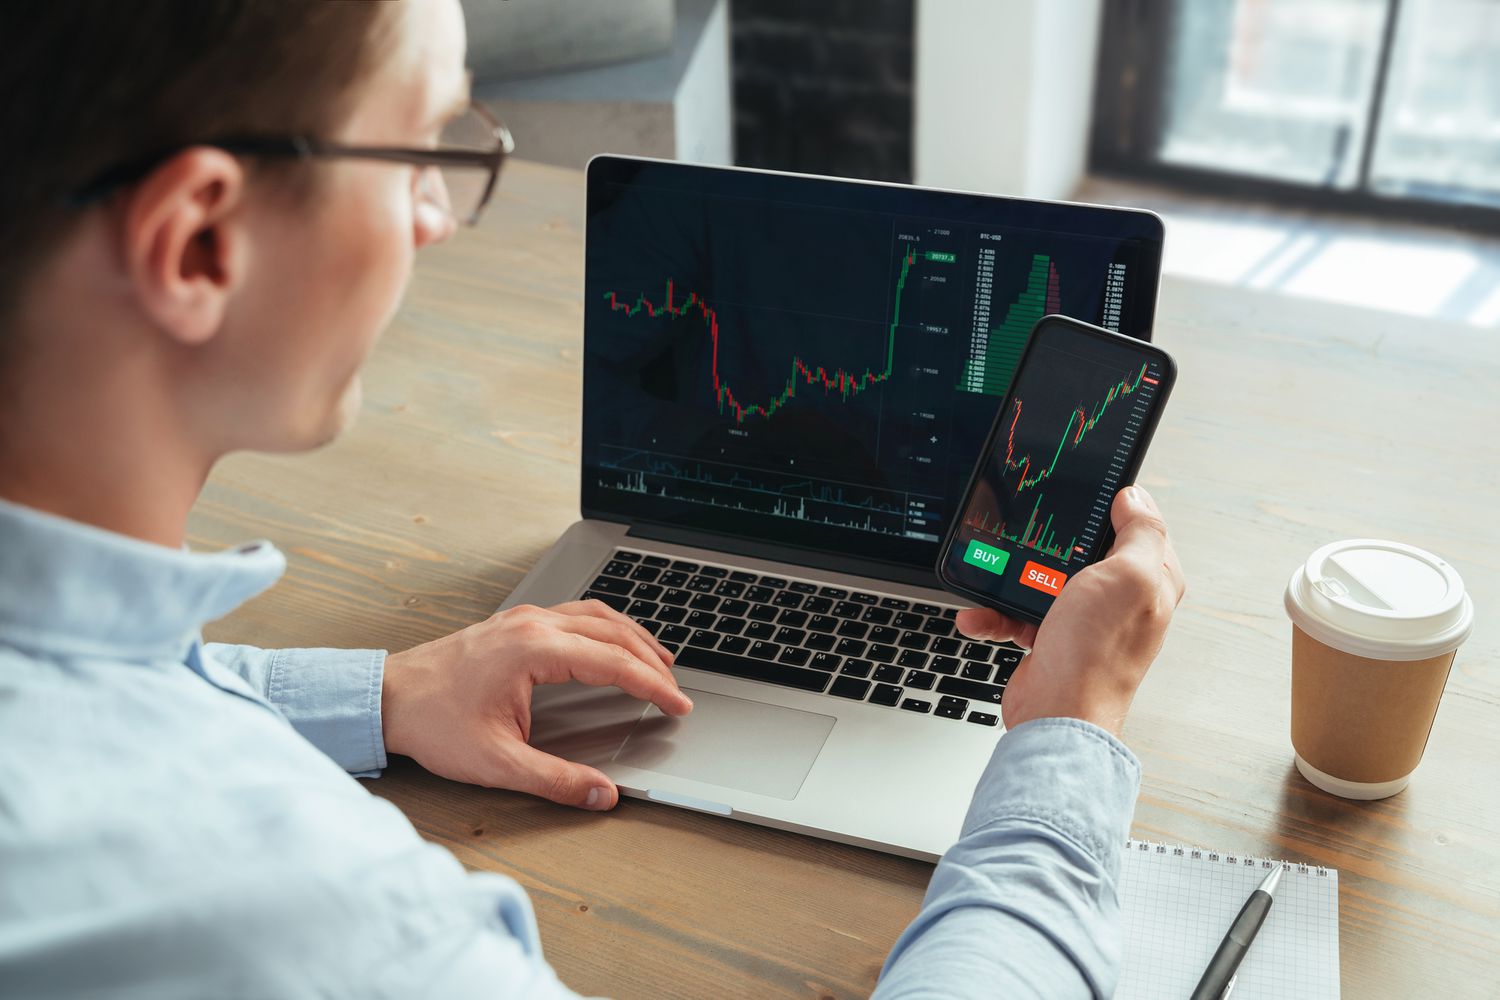 5 Best Crypto Options Trading Platforms for March 